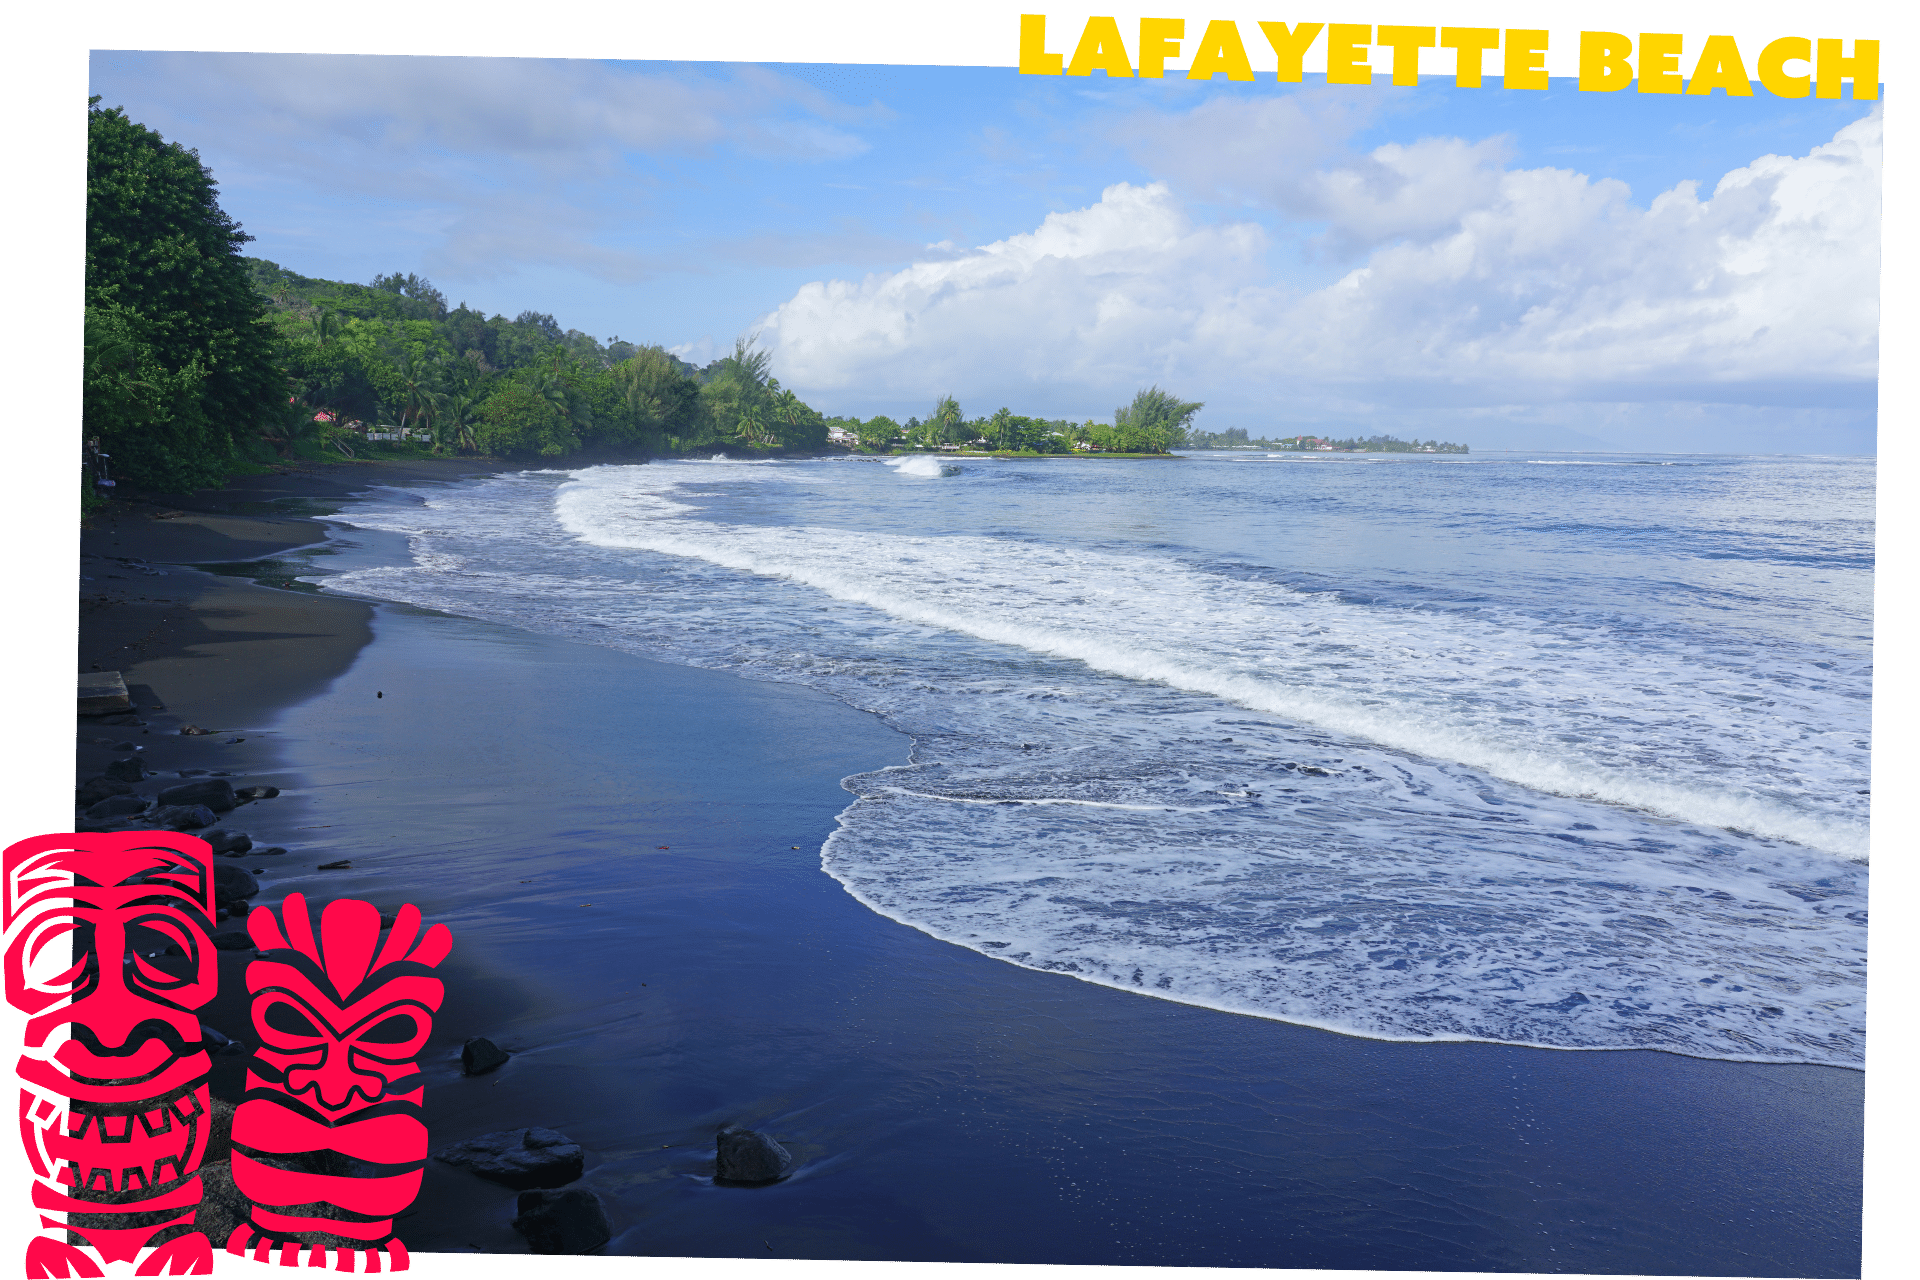 The black sands of Lafayette Beach in Tahiti makes it one of the world's most unique beaches.